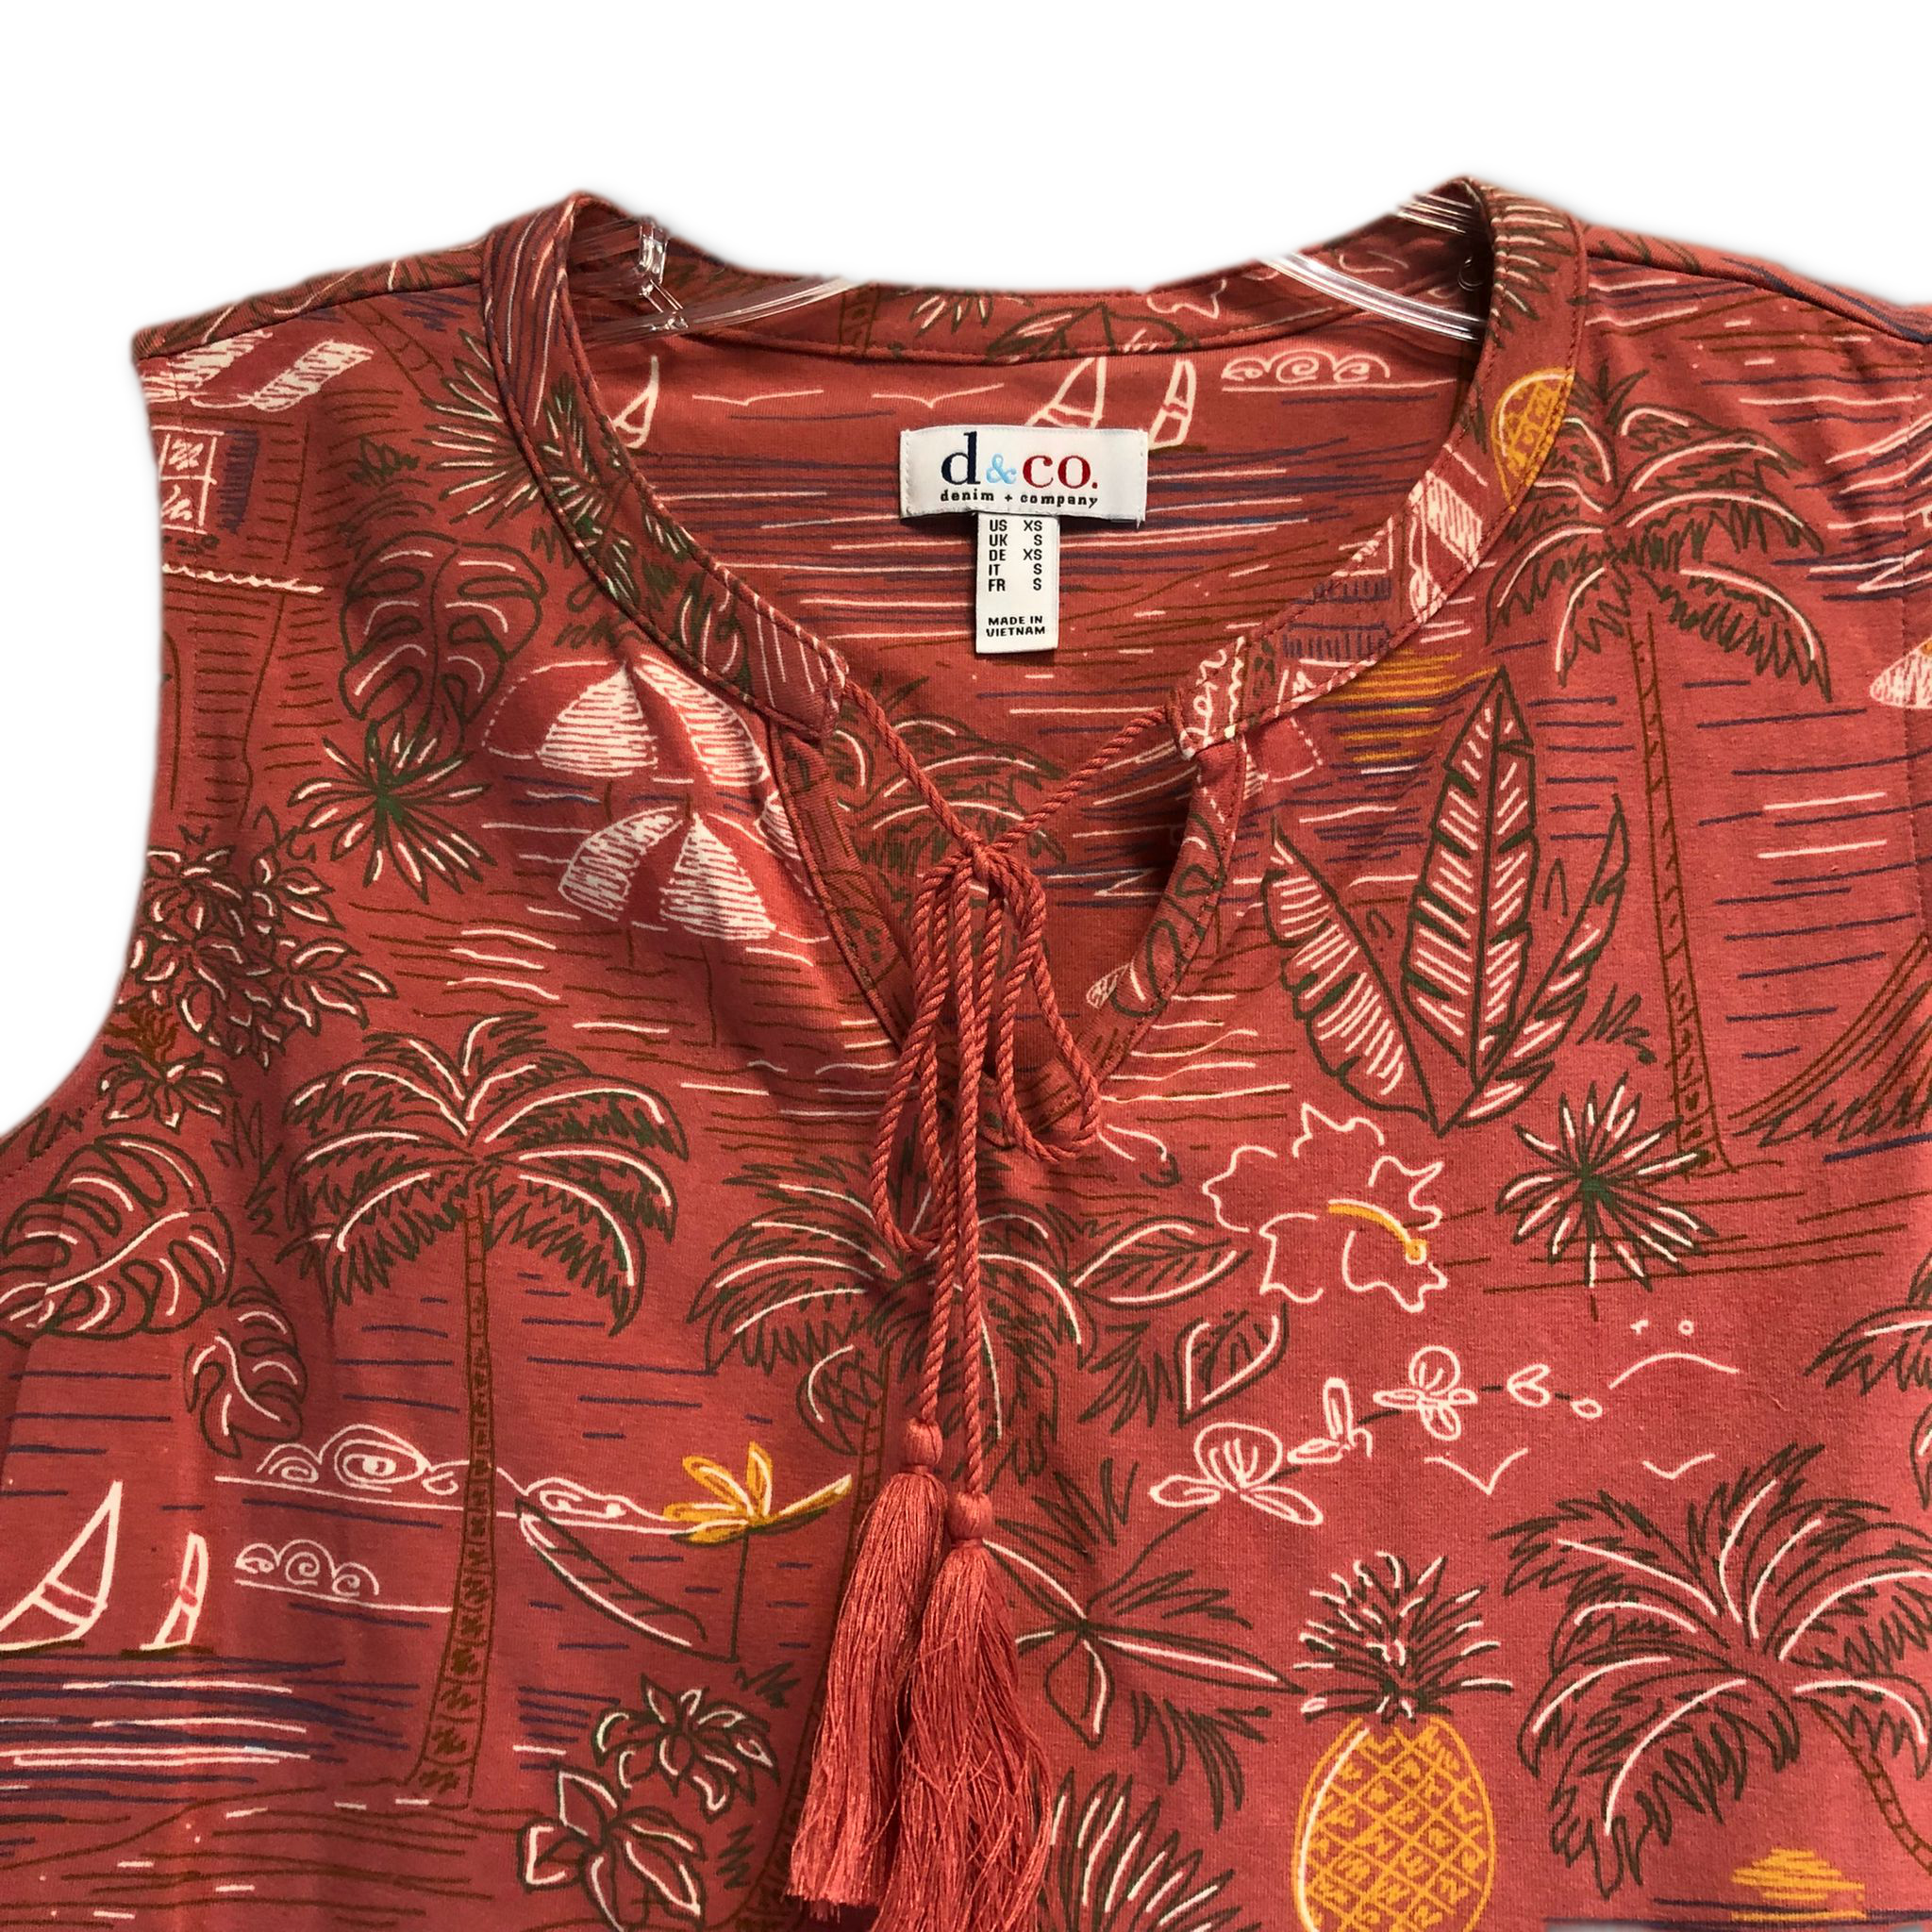 Denim & Co. Printed Jersey Tank with Tassle Trim - Semi-fitted, 95% Cotton